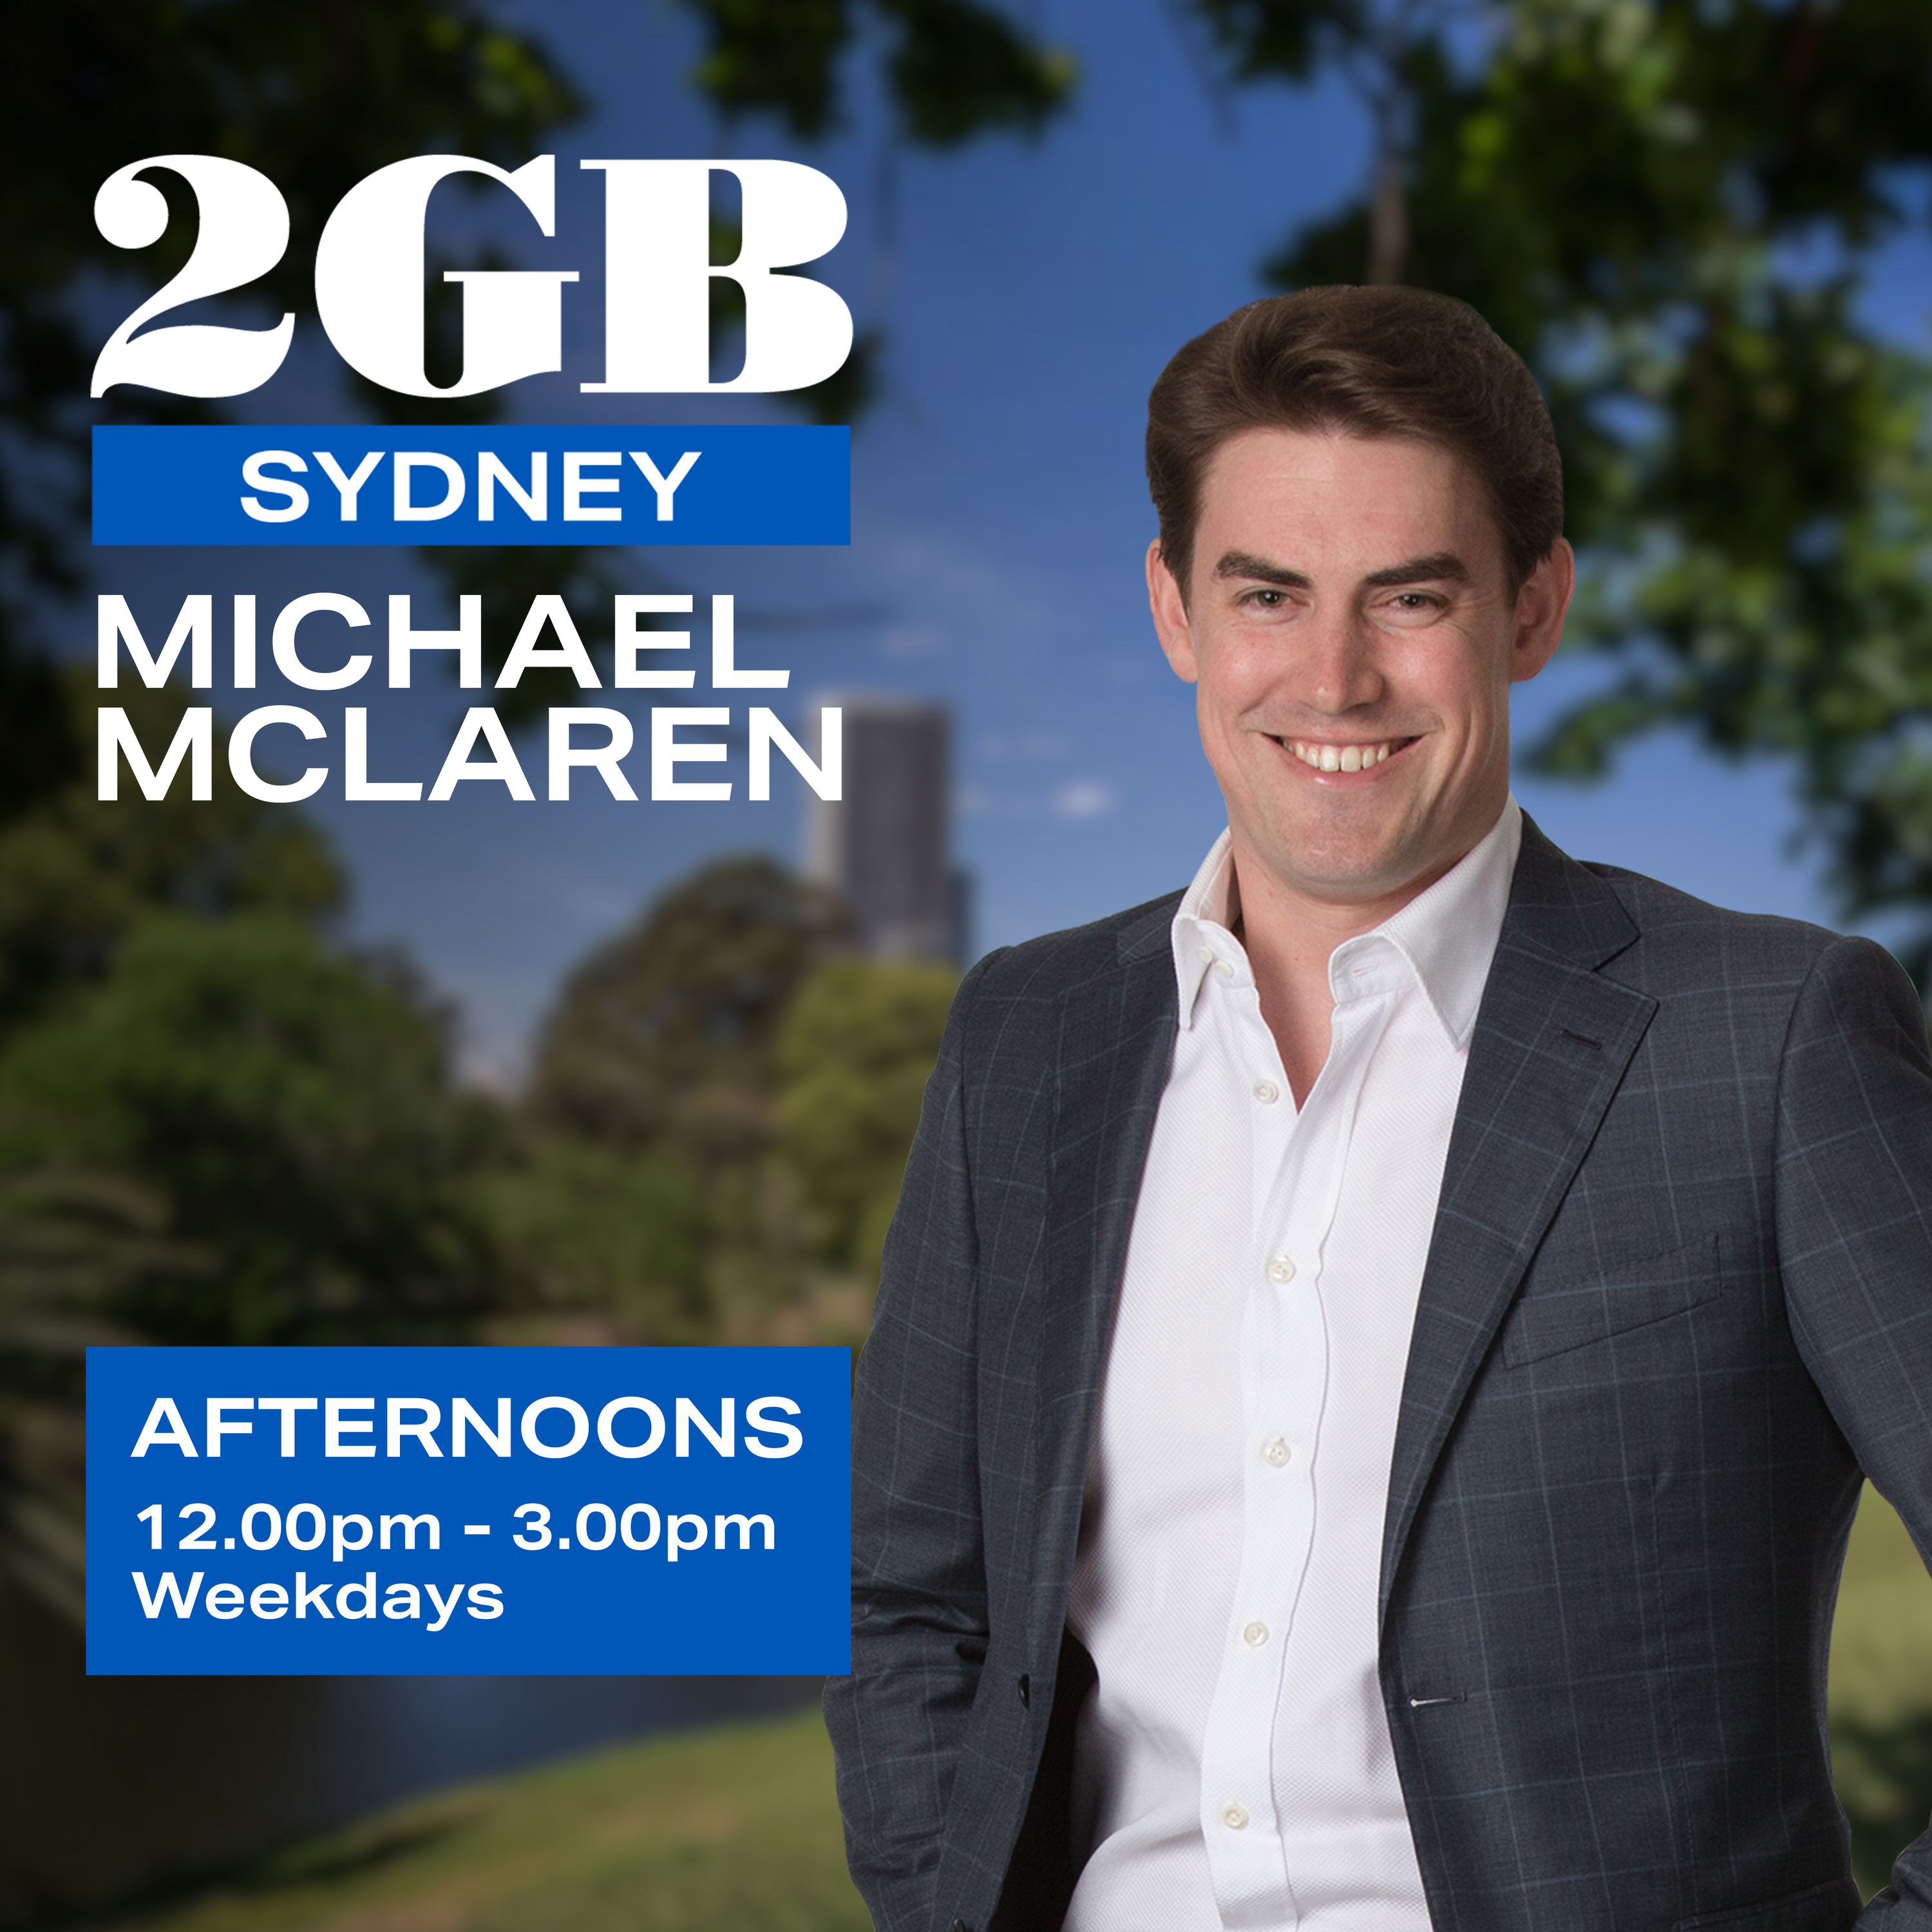 Afternoons with Michael McLaren - Thursday, 18th April